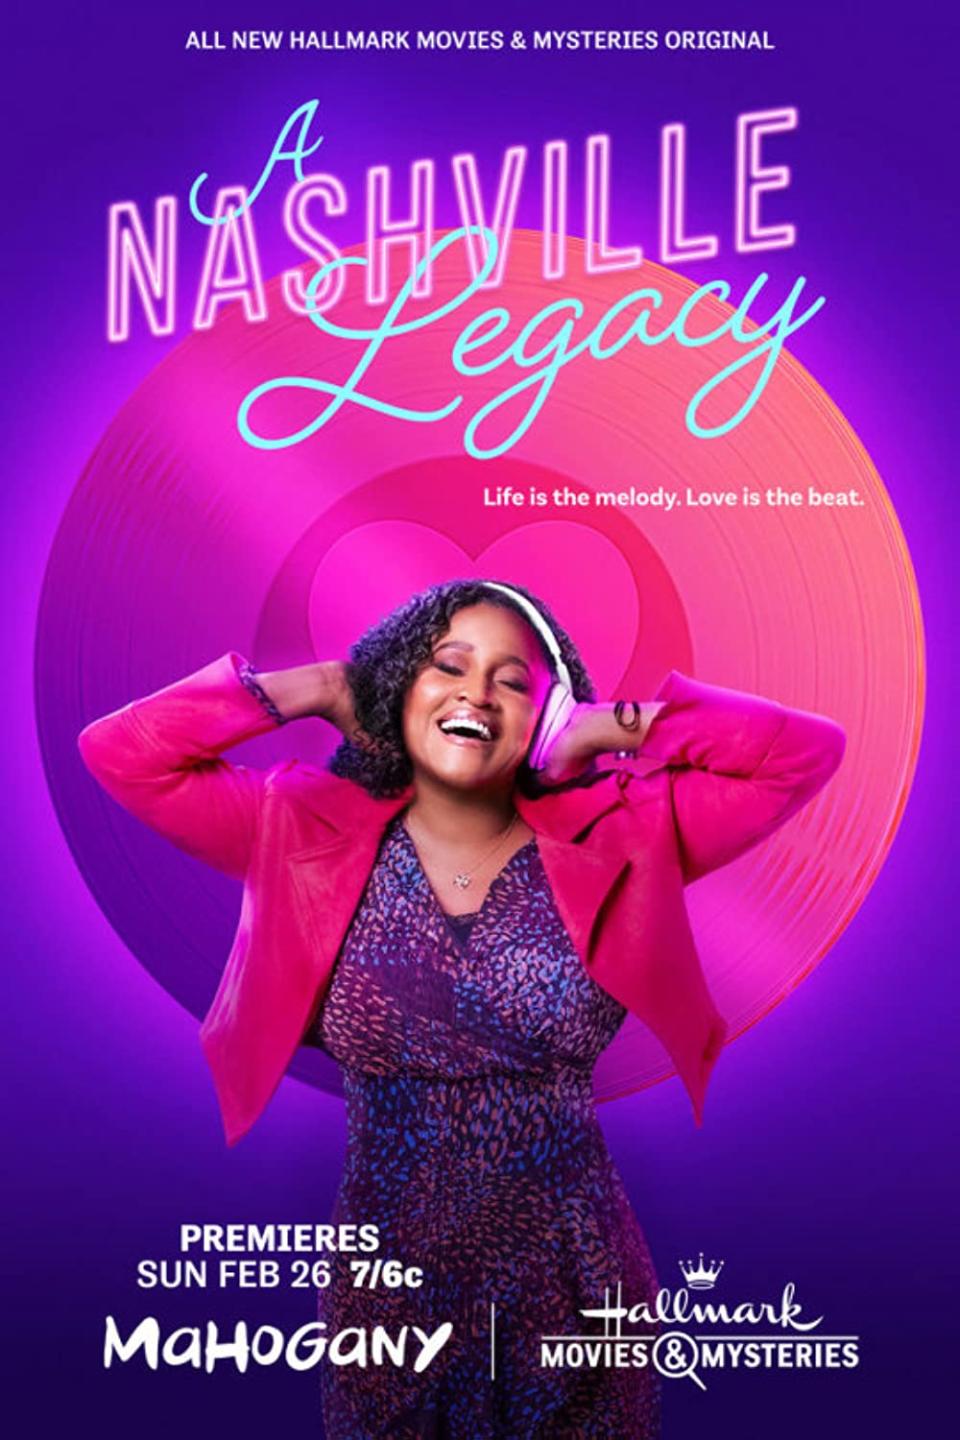 Hallmark's Mahogany-branded "A Nashville Legacy" is the first film in the two year old sub-brand's history to be premiered on Hallmark's broadcast network.